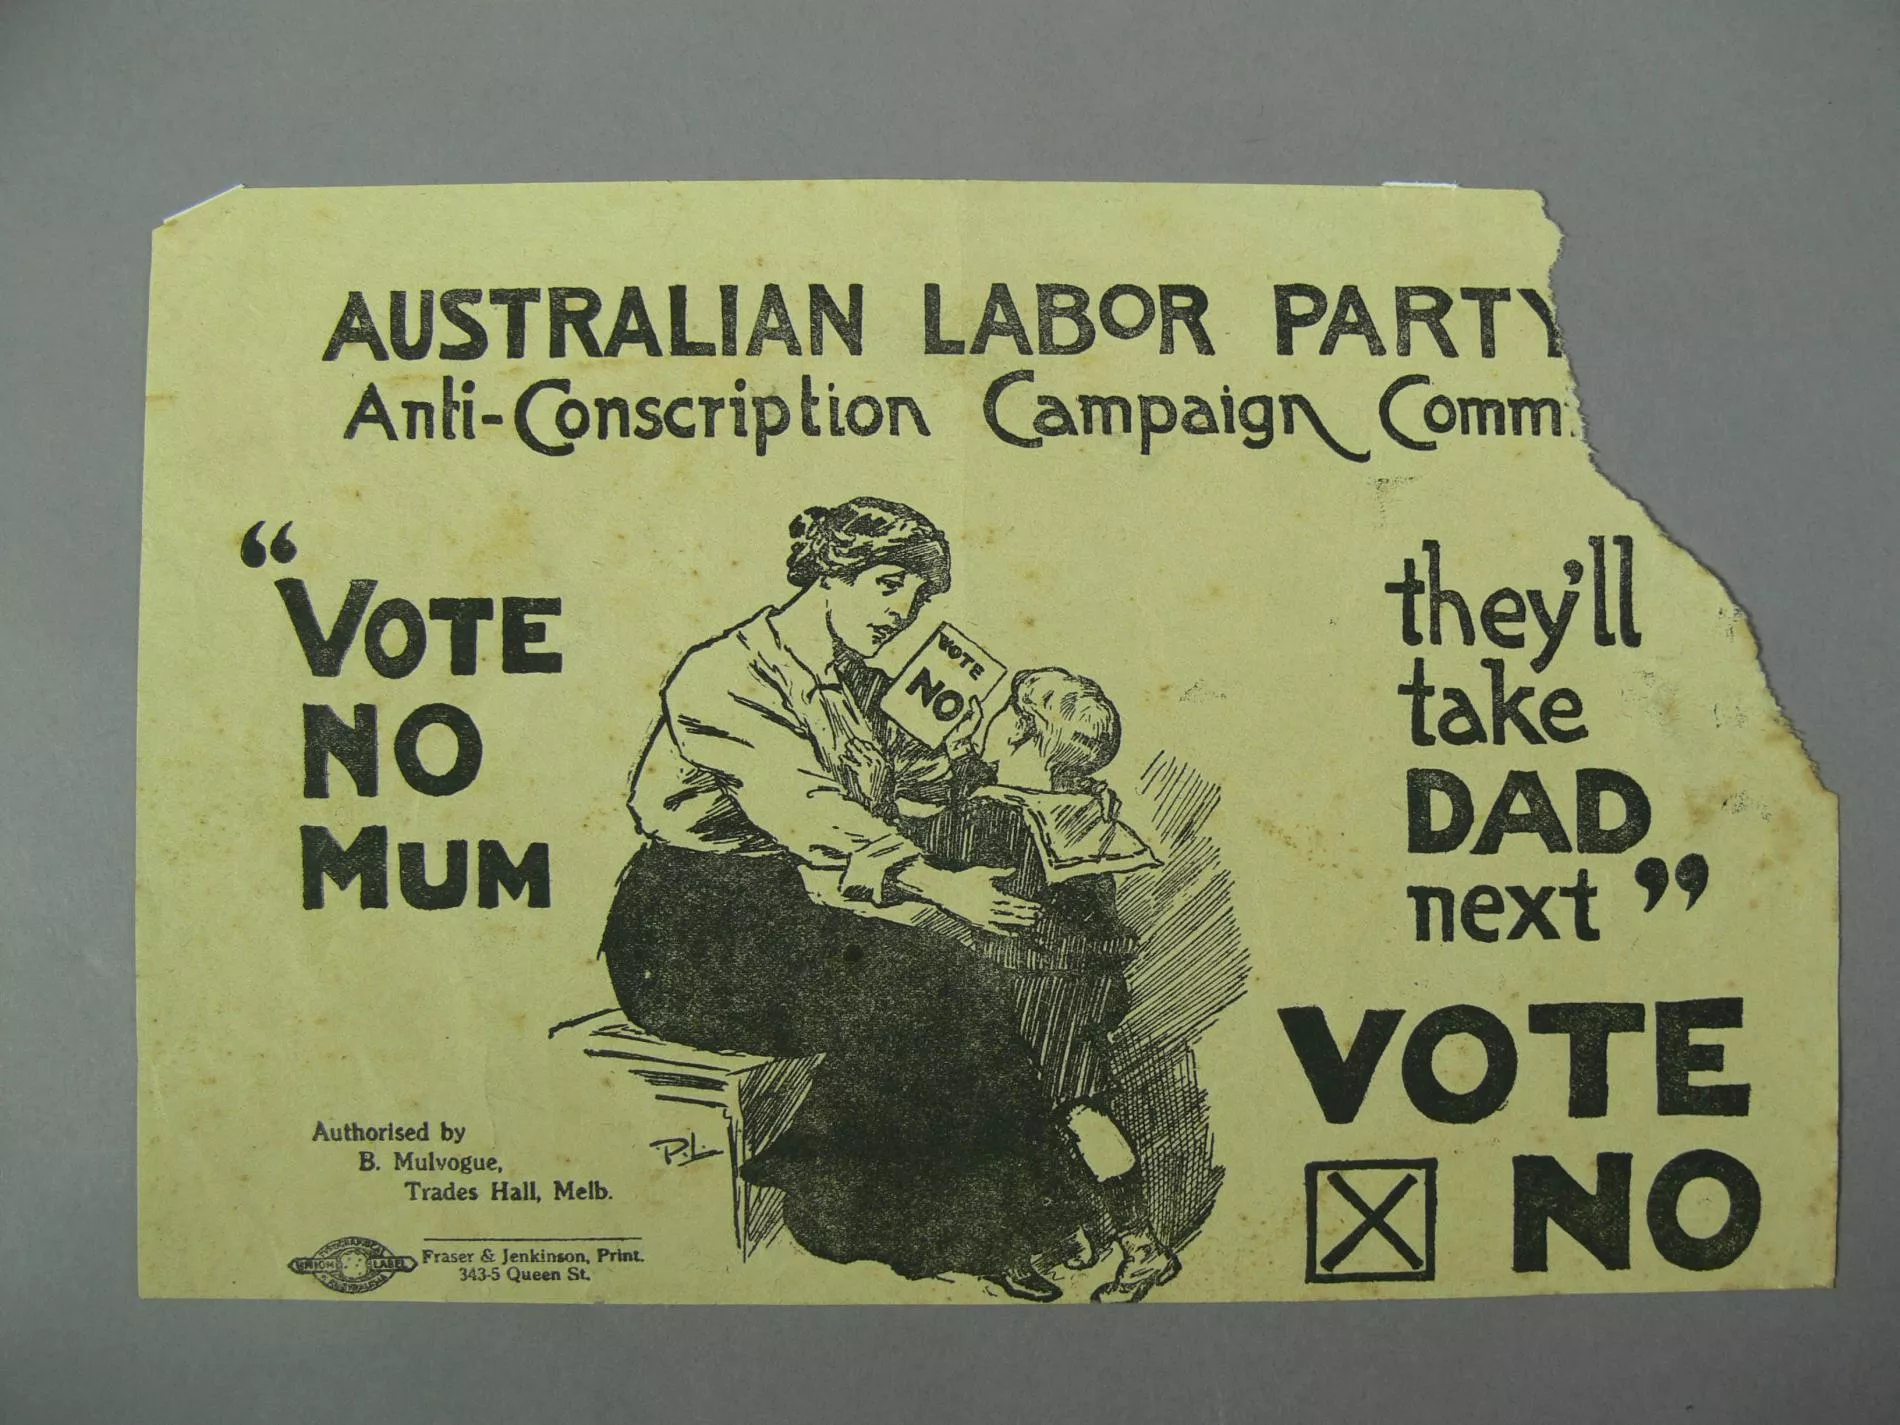 A yellowed leaflet with black script writing and an image of a mother and a child. The corner of the leaflet is torn off removing some of the text. The text reads Australian Labor Party Anti-Conscription Campaign. Vote no mum, they'll take dad next. Vote no.